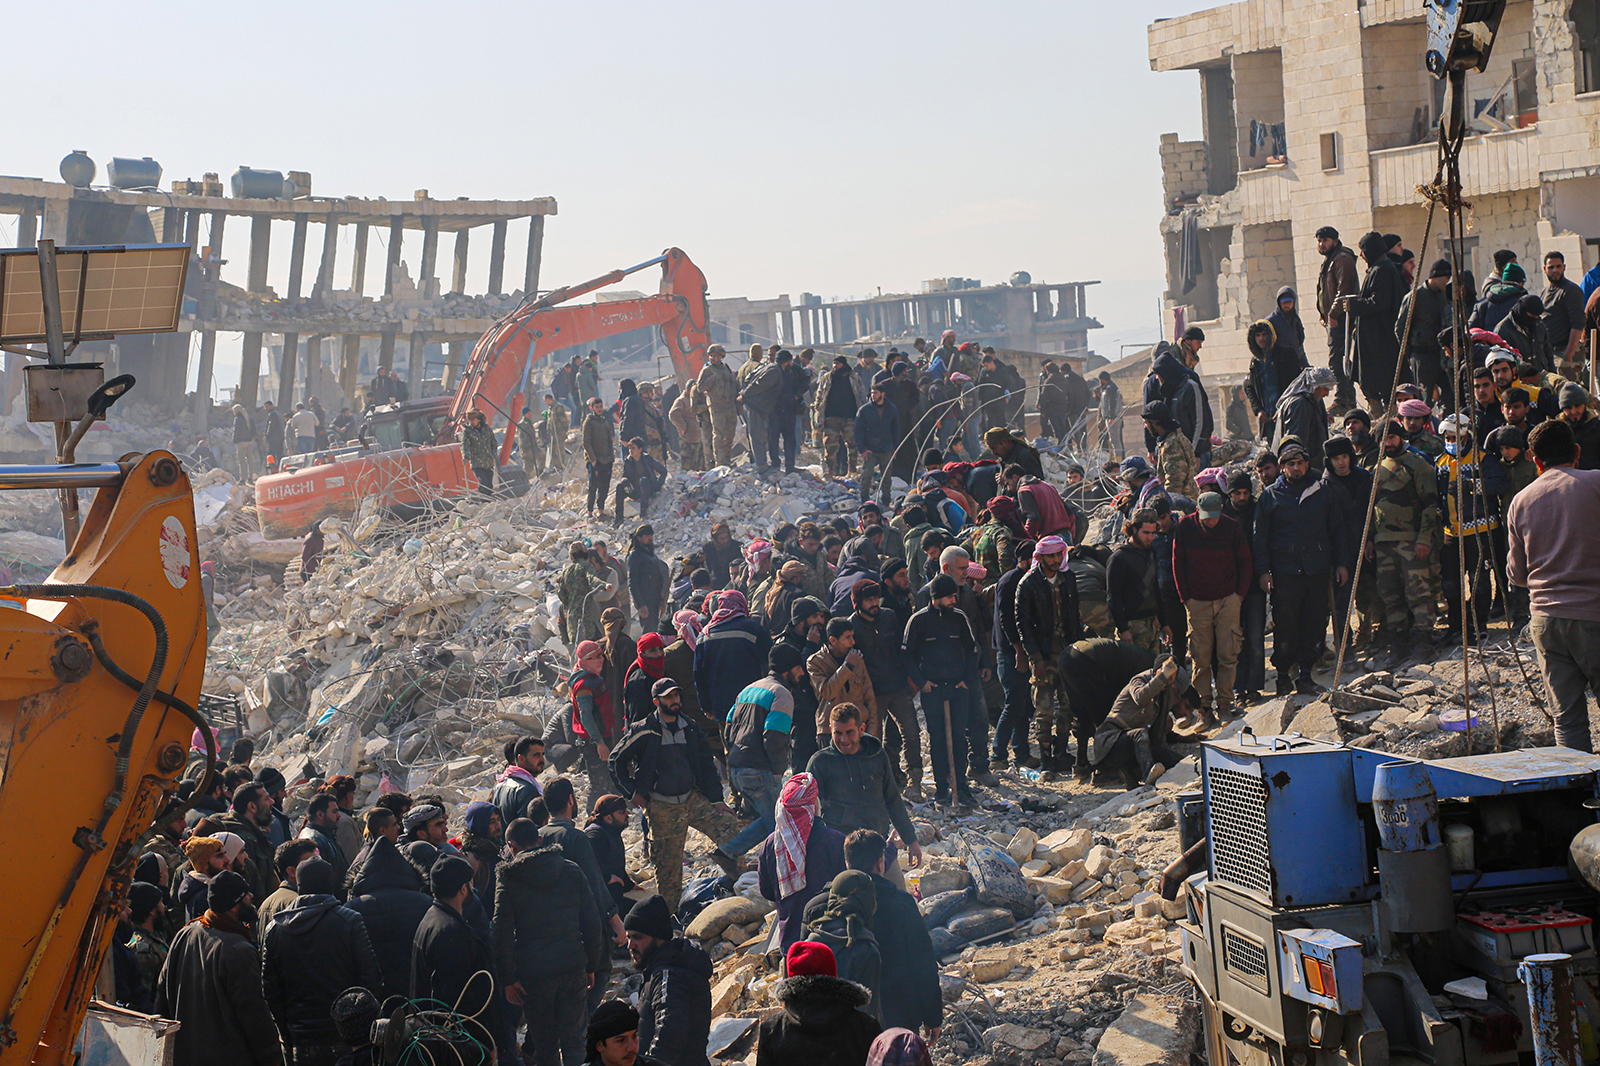 On February 9, personnel and civilians carried out a search and rescue operation in the Afrin district of Aleppo, Syria.